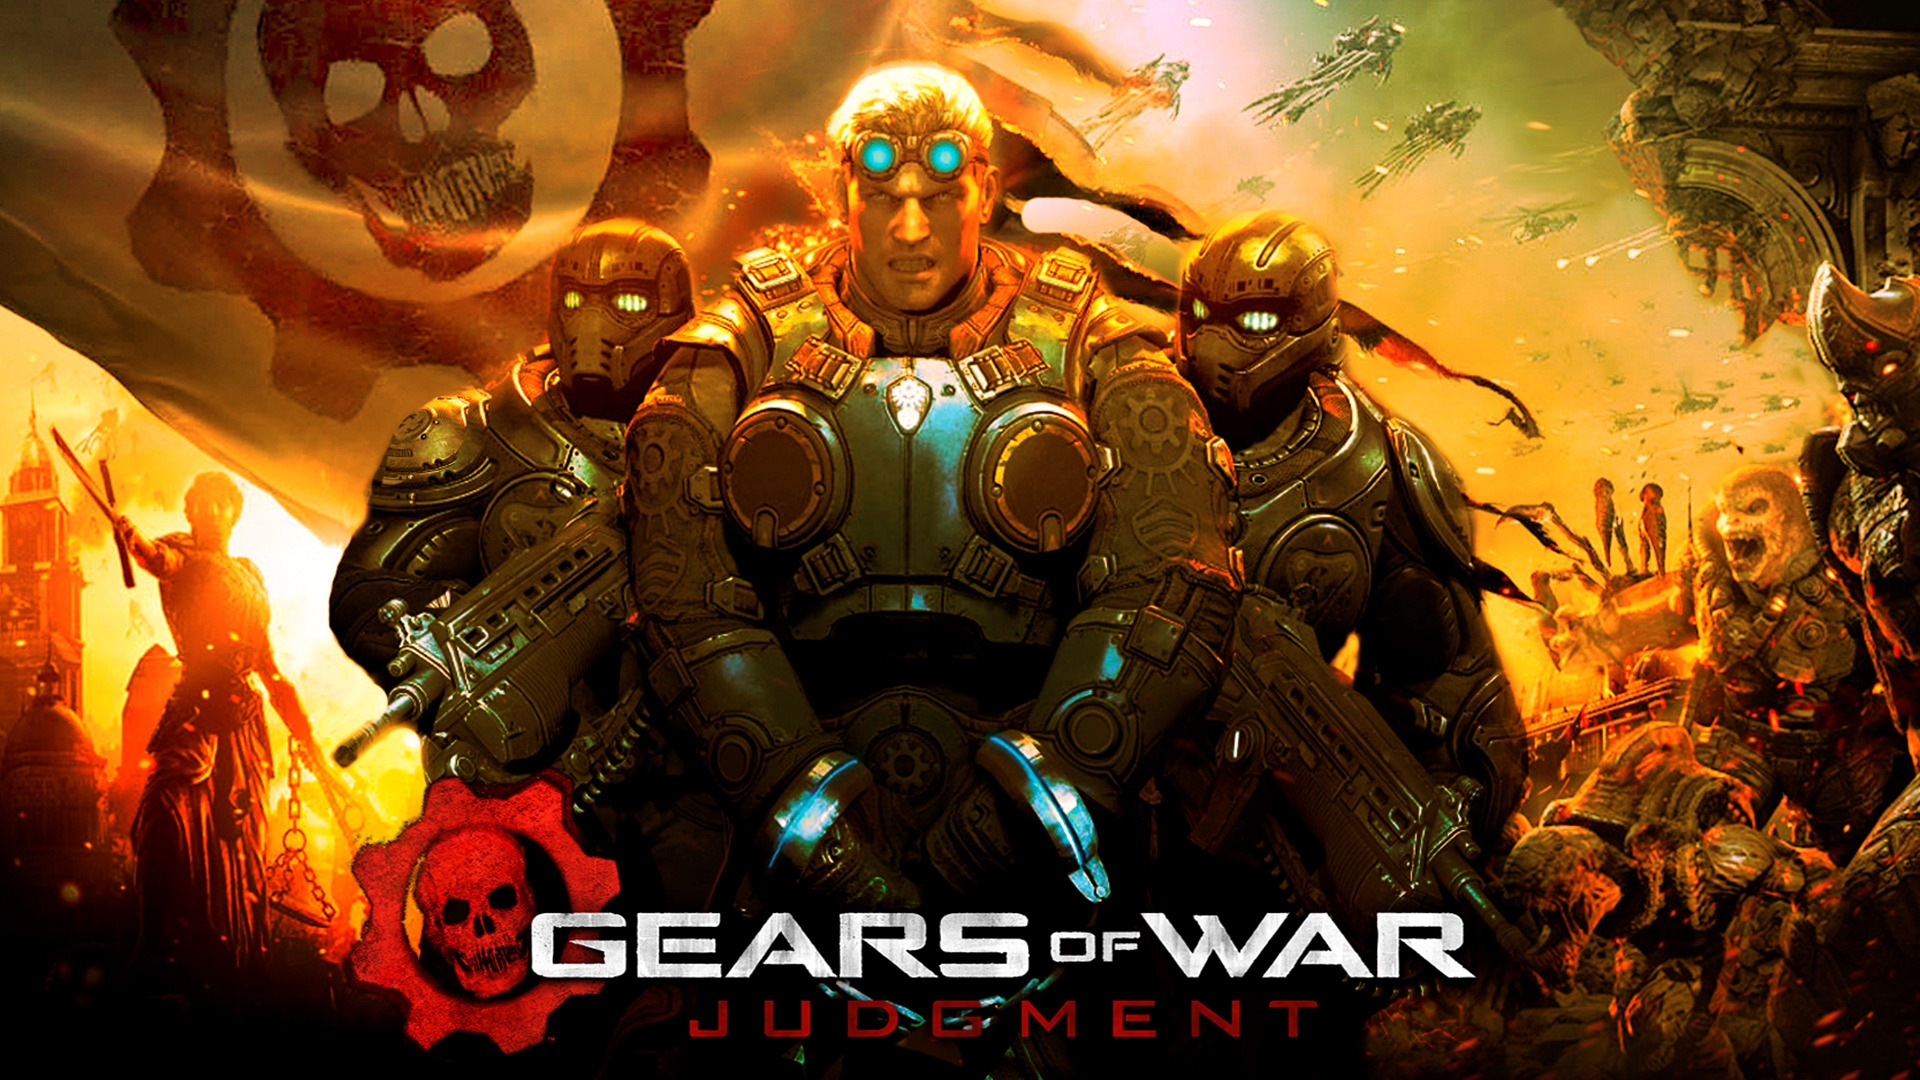 Gears of War Judgment Game for 1920 x 1080 HDTV 1080p resolution